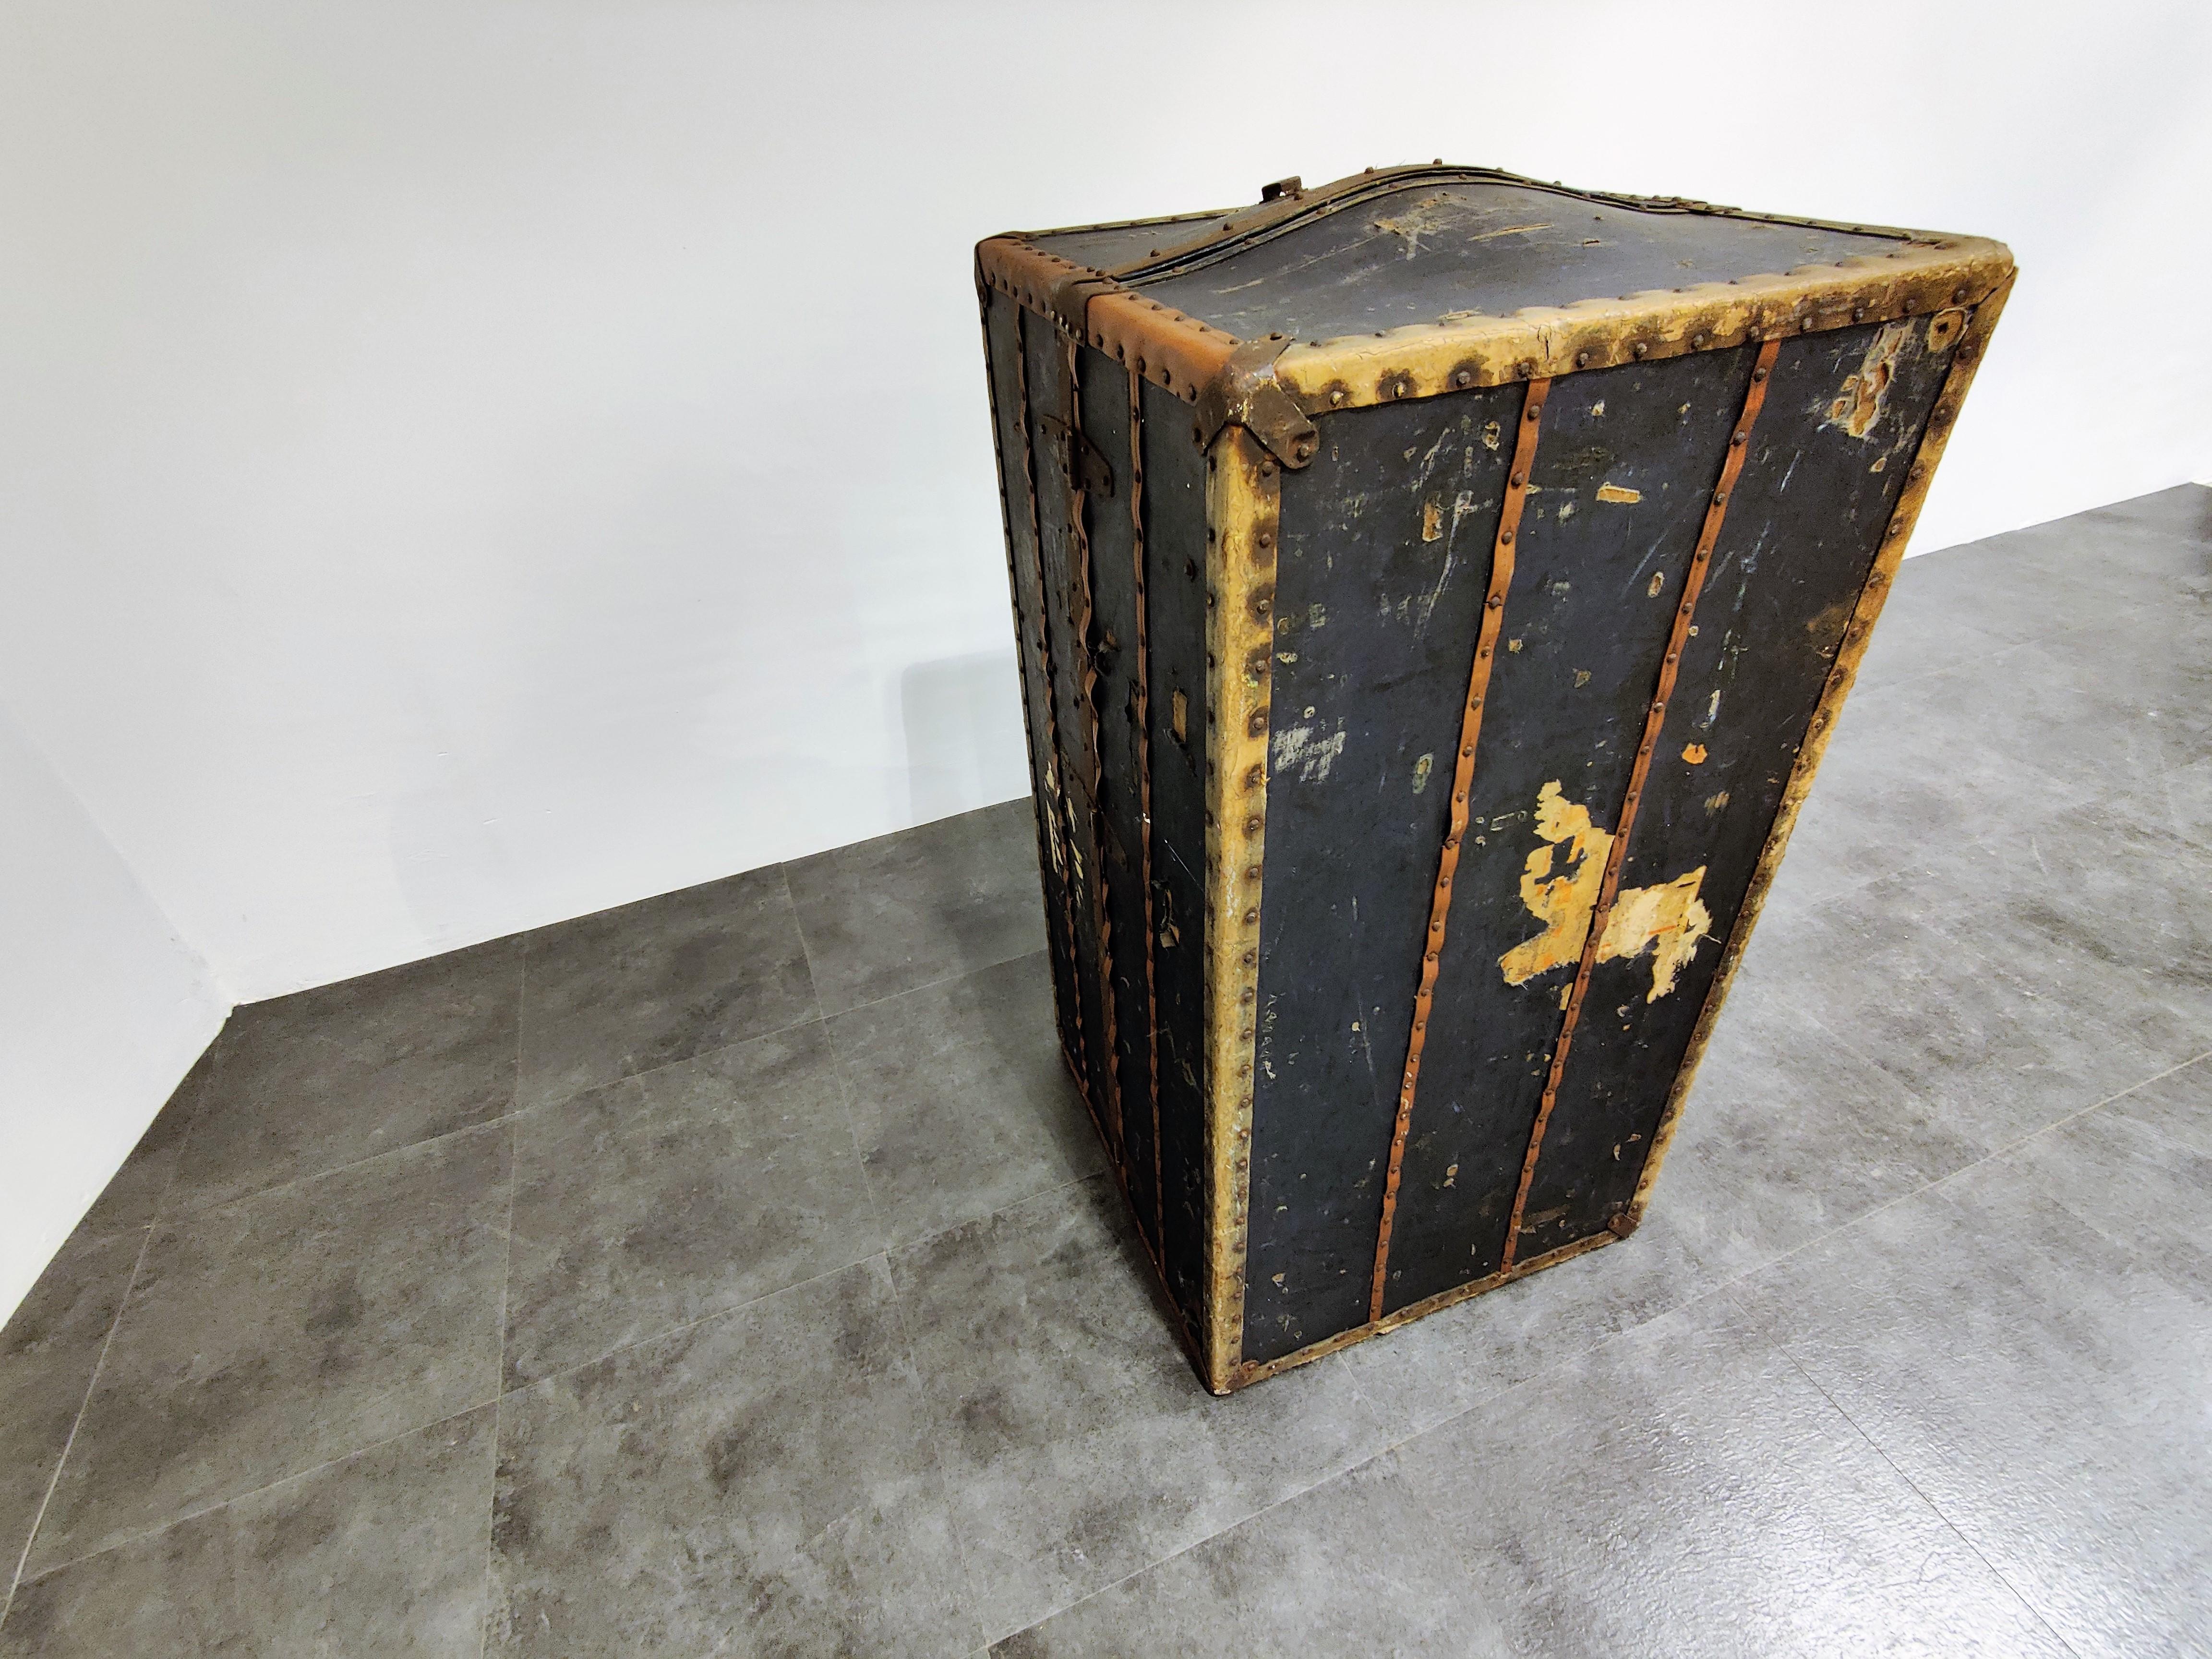 Beautiful and fully original steamer trunk by Innovation.

This authentic traveler’s case (steamer trunk) was used in the early 20th century to travel the world by boat. Travelling was then considered a privilege a was only for the wealthy. Back